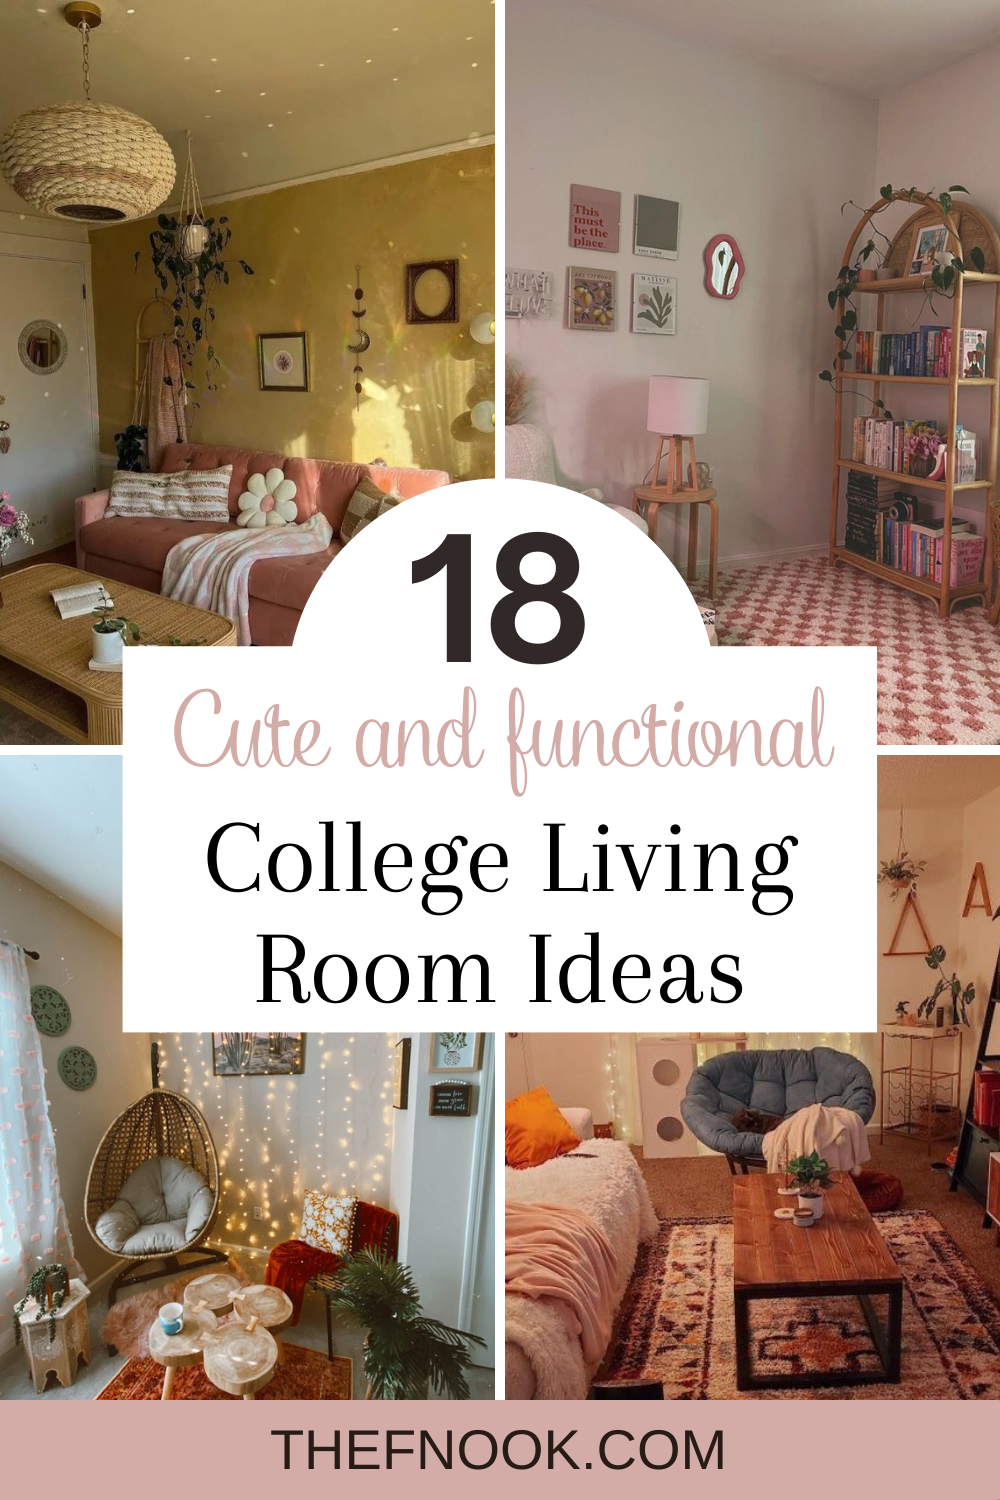 18 Cute and Functional College Living Room Decor Ideas